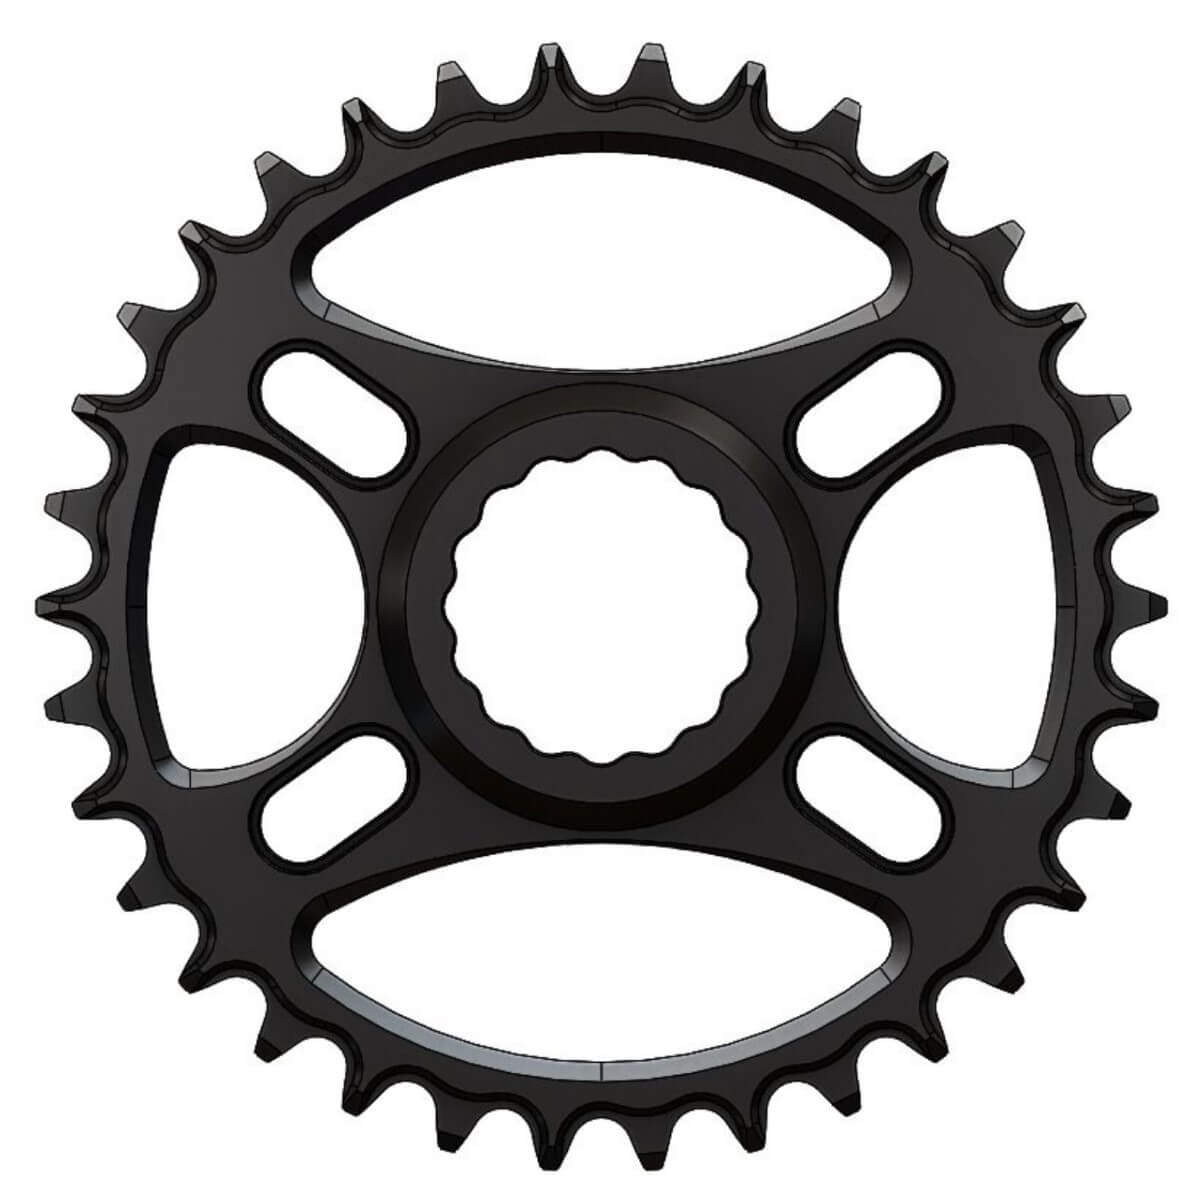 C50 Chainring Narrow Wide 28T for Race Face direct mount. Hyperglide+ Compatible